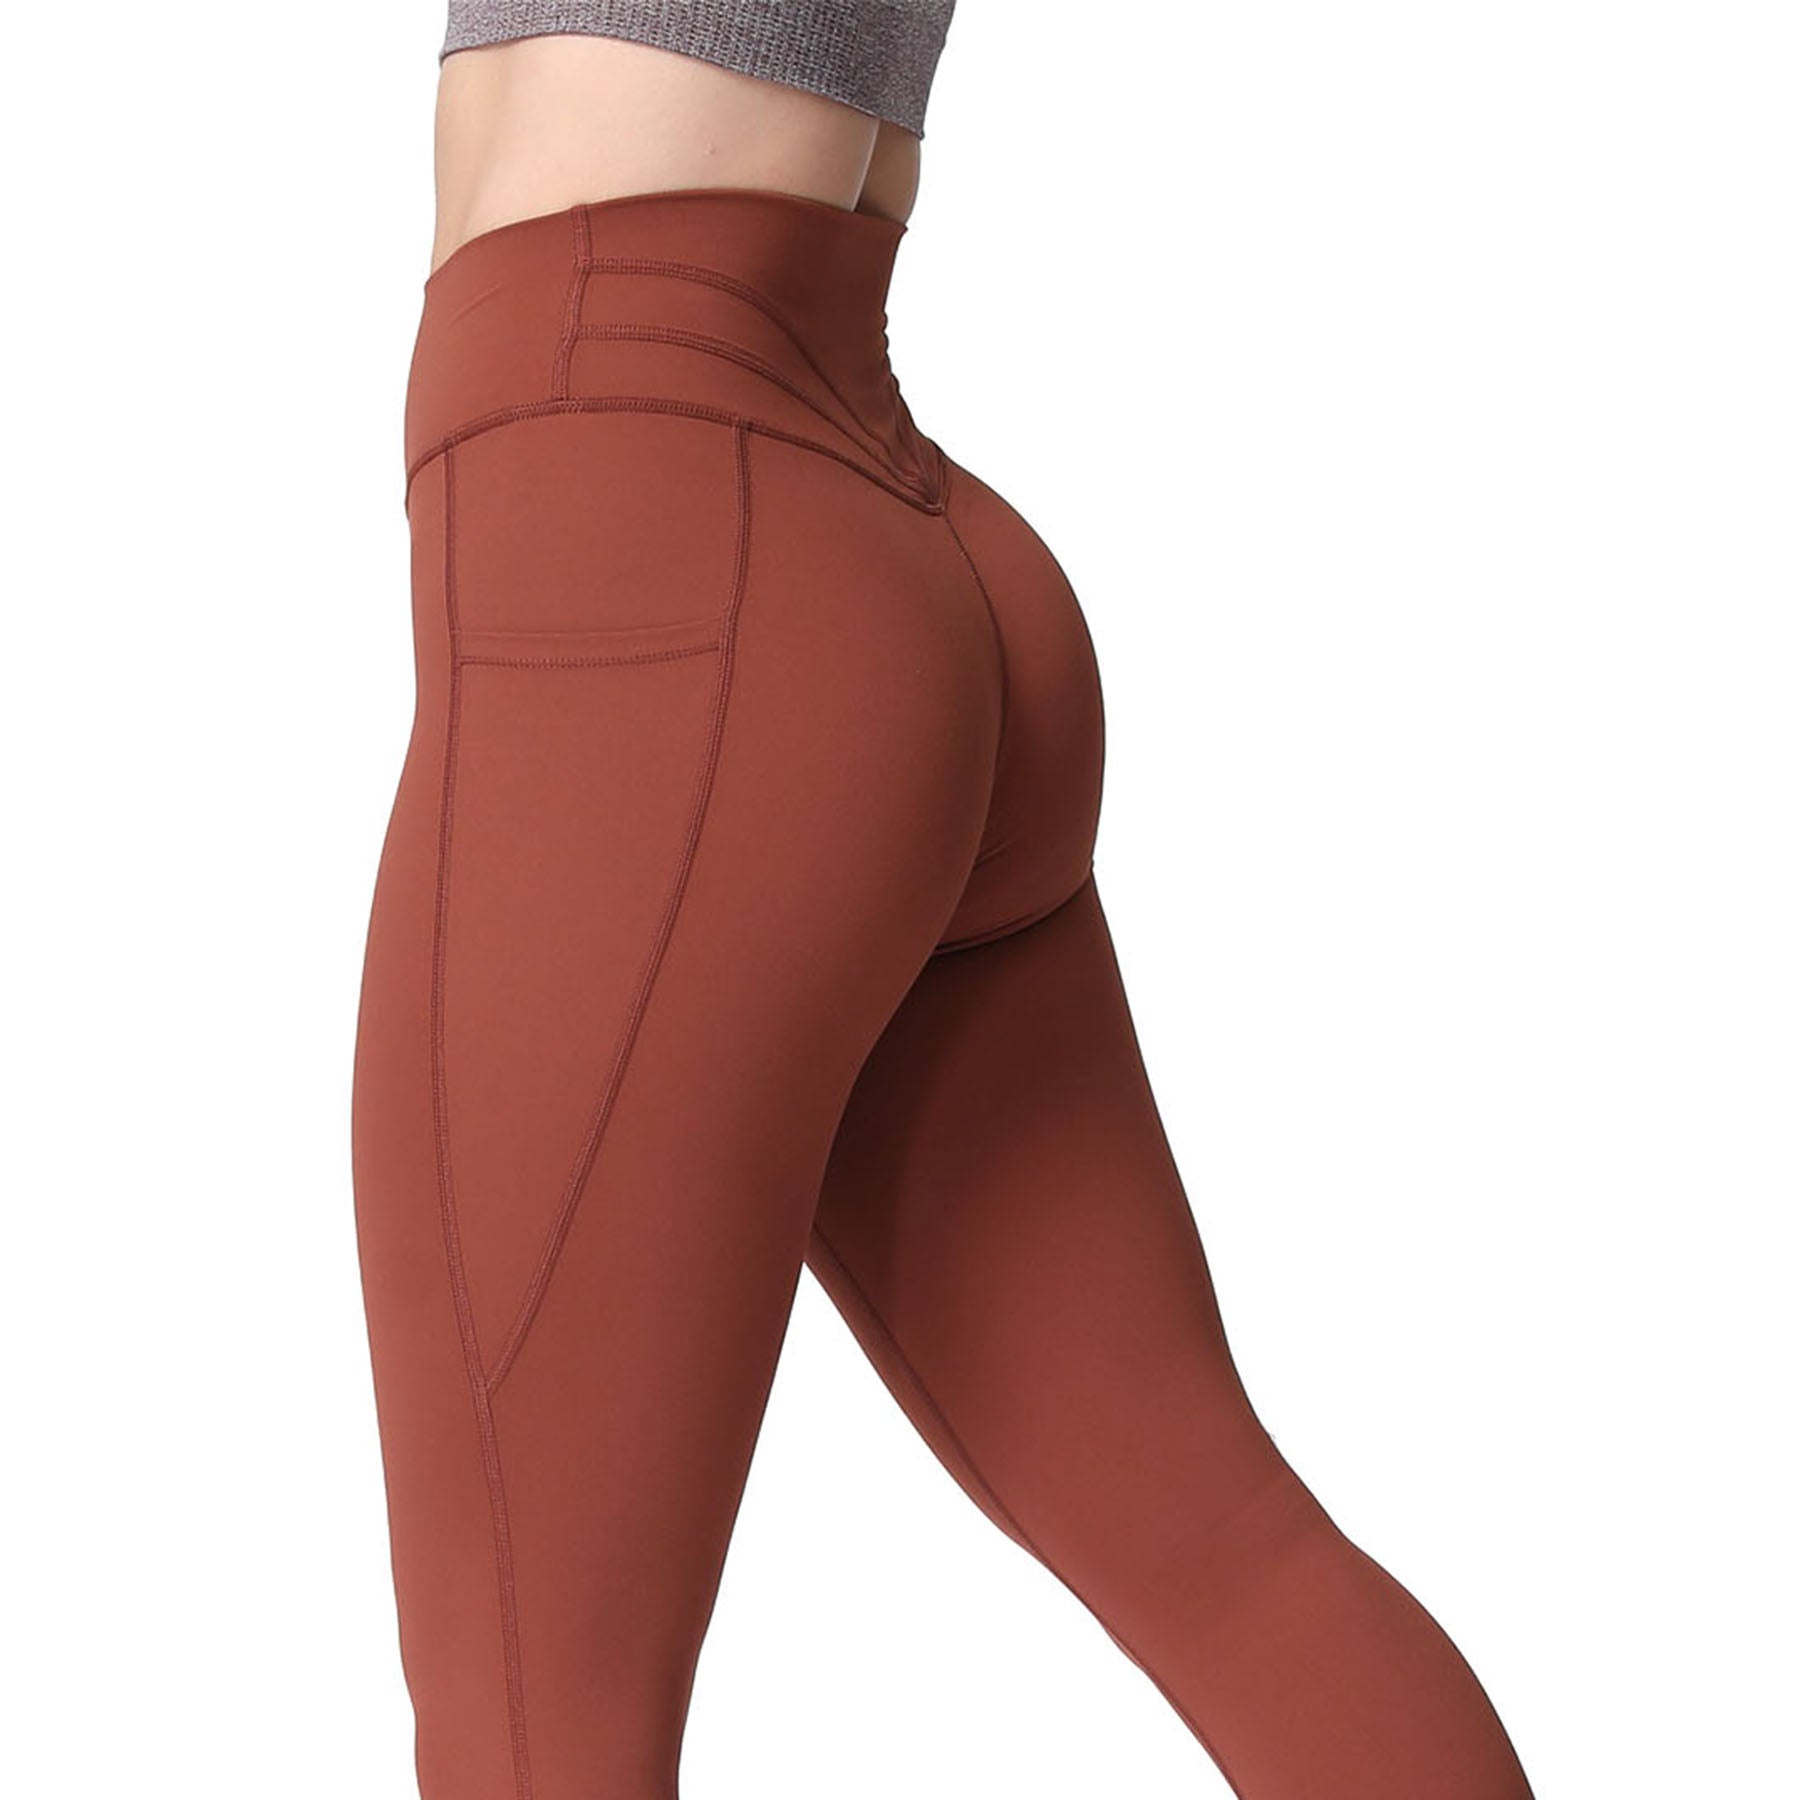 High waisted leggings with pockets, 3 colors